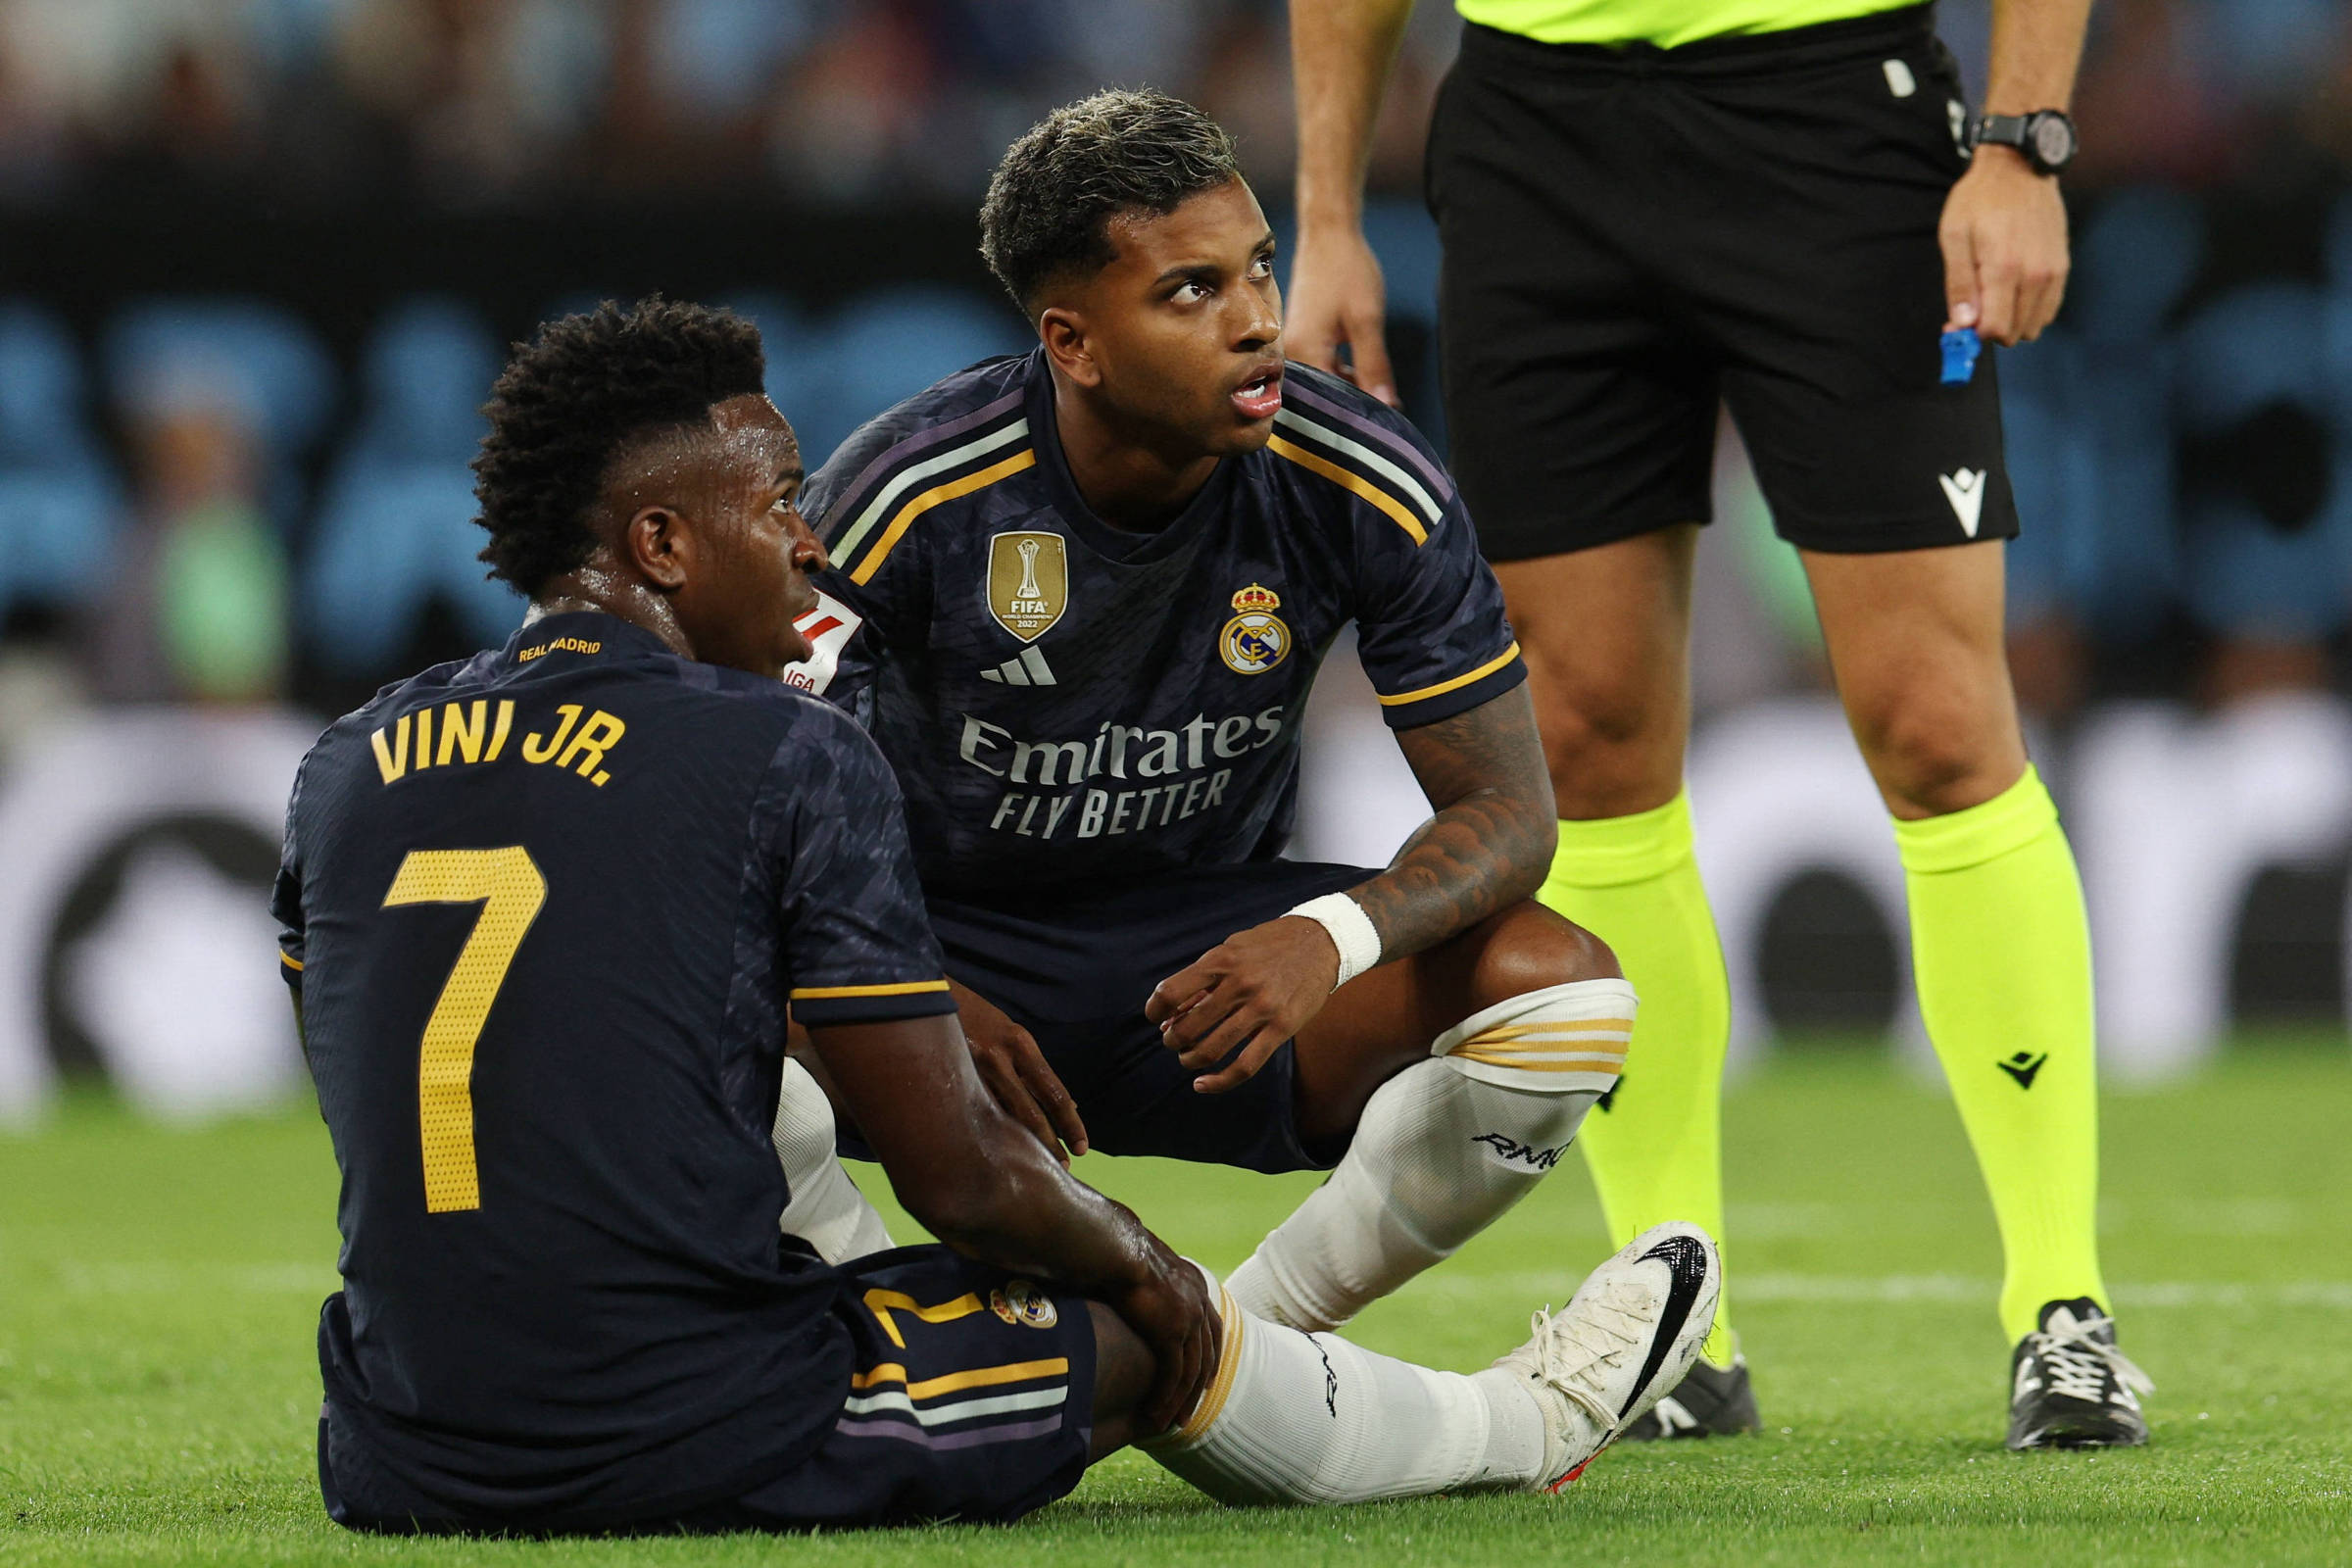 Vinicius Junior has confirmed injury and should be cut from the national team